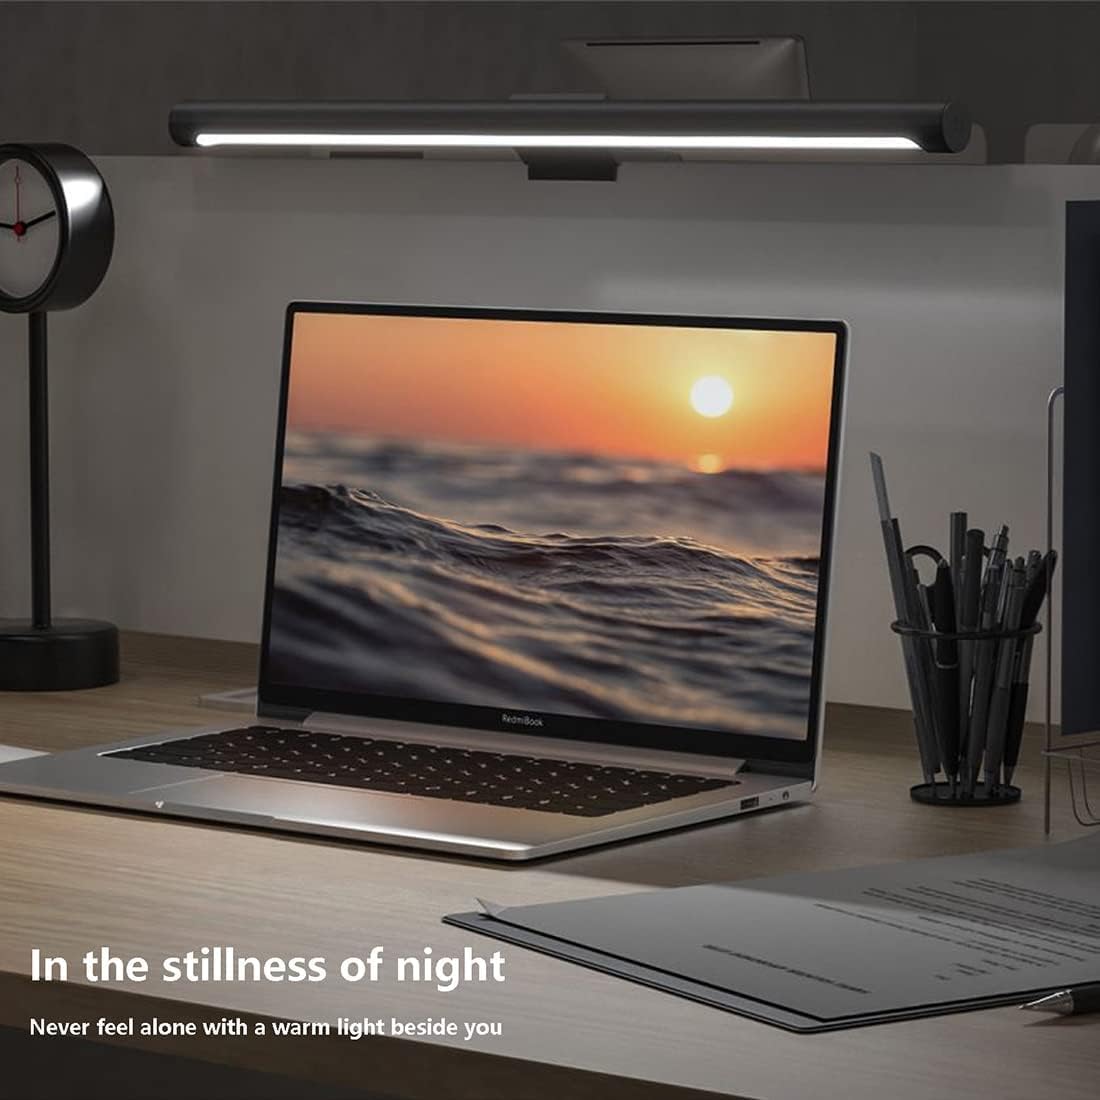 Xiaomi Mi Computer Monitor Light Bar - Easy Installation, Extra Computer Lighting w/o Taking Desktop Space, with Wireless Remote Control Adjusting Lights Easily